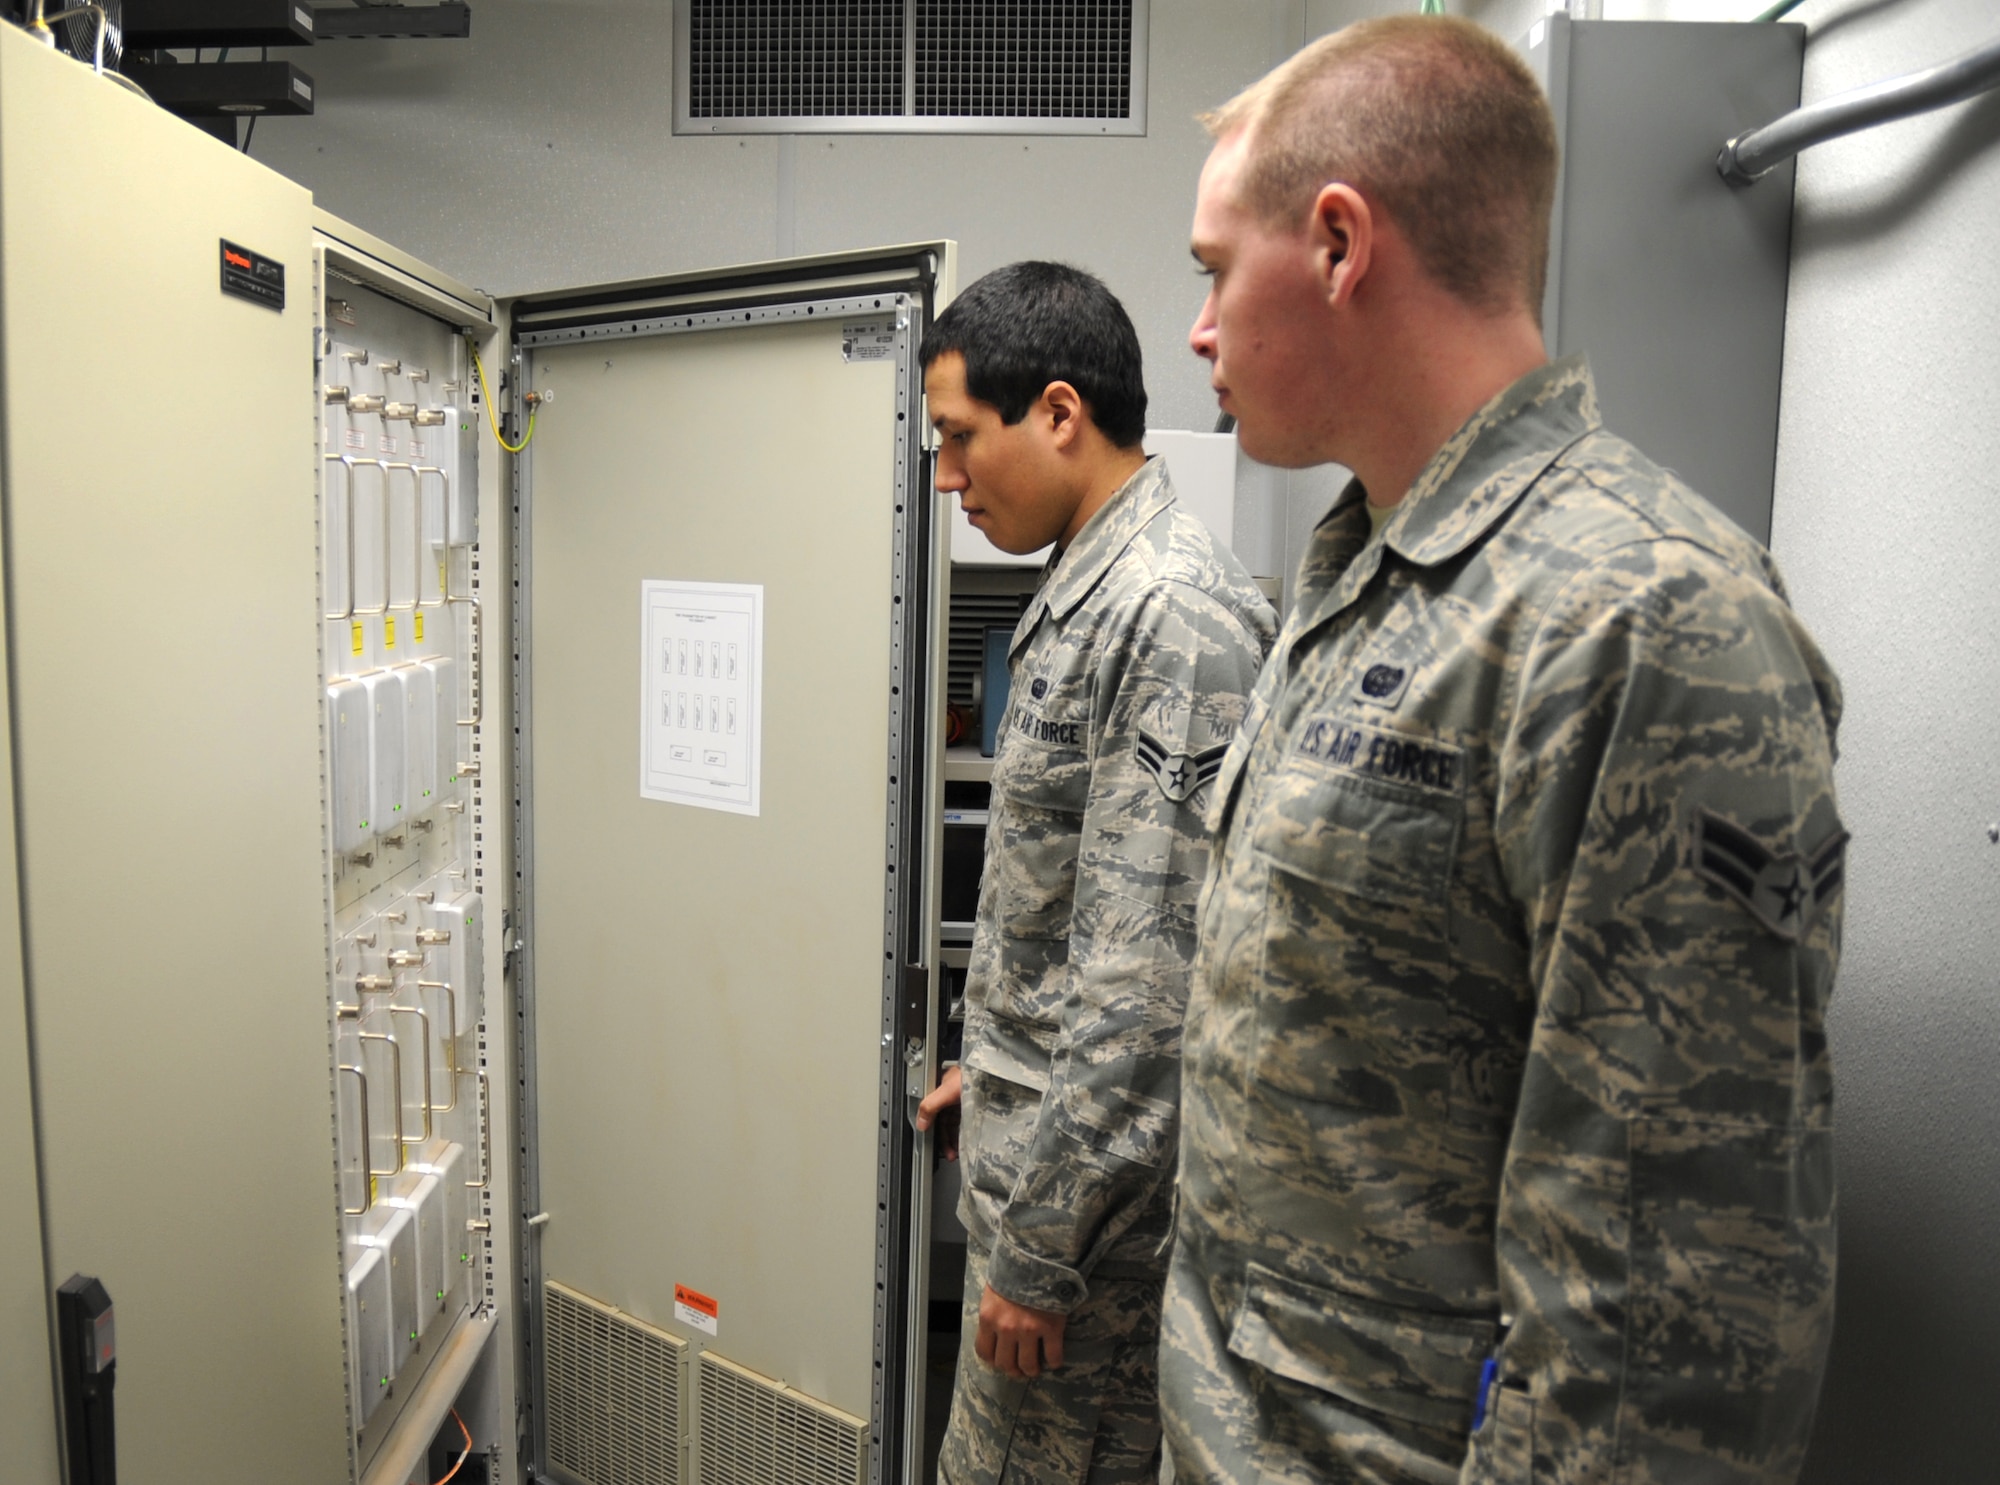 U.S. Air Force Airmen 1st Class Greg Stanley and Jordan Ortiz, 27th Special Operations Communications Squadron radar maintainers, inspect transmission components of the Digital Airport Surveillance Radar at Cannon Air Force Base, N.M., Feb. 24, 2012. The DASR system will replace the existing Airport Surveillance Radar in May 2012. (U.S. Air Force photo by Airman 1st Class Alexxis Pons Abascal) 